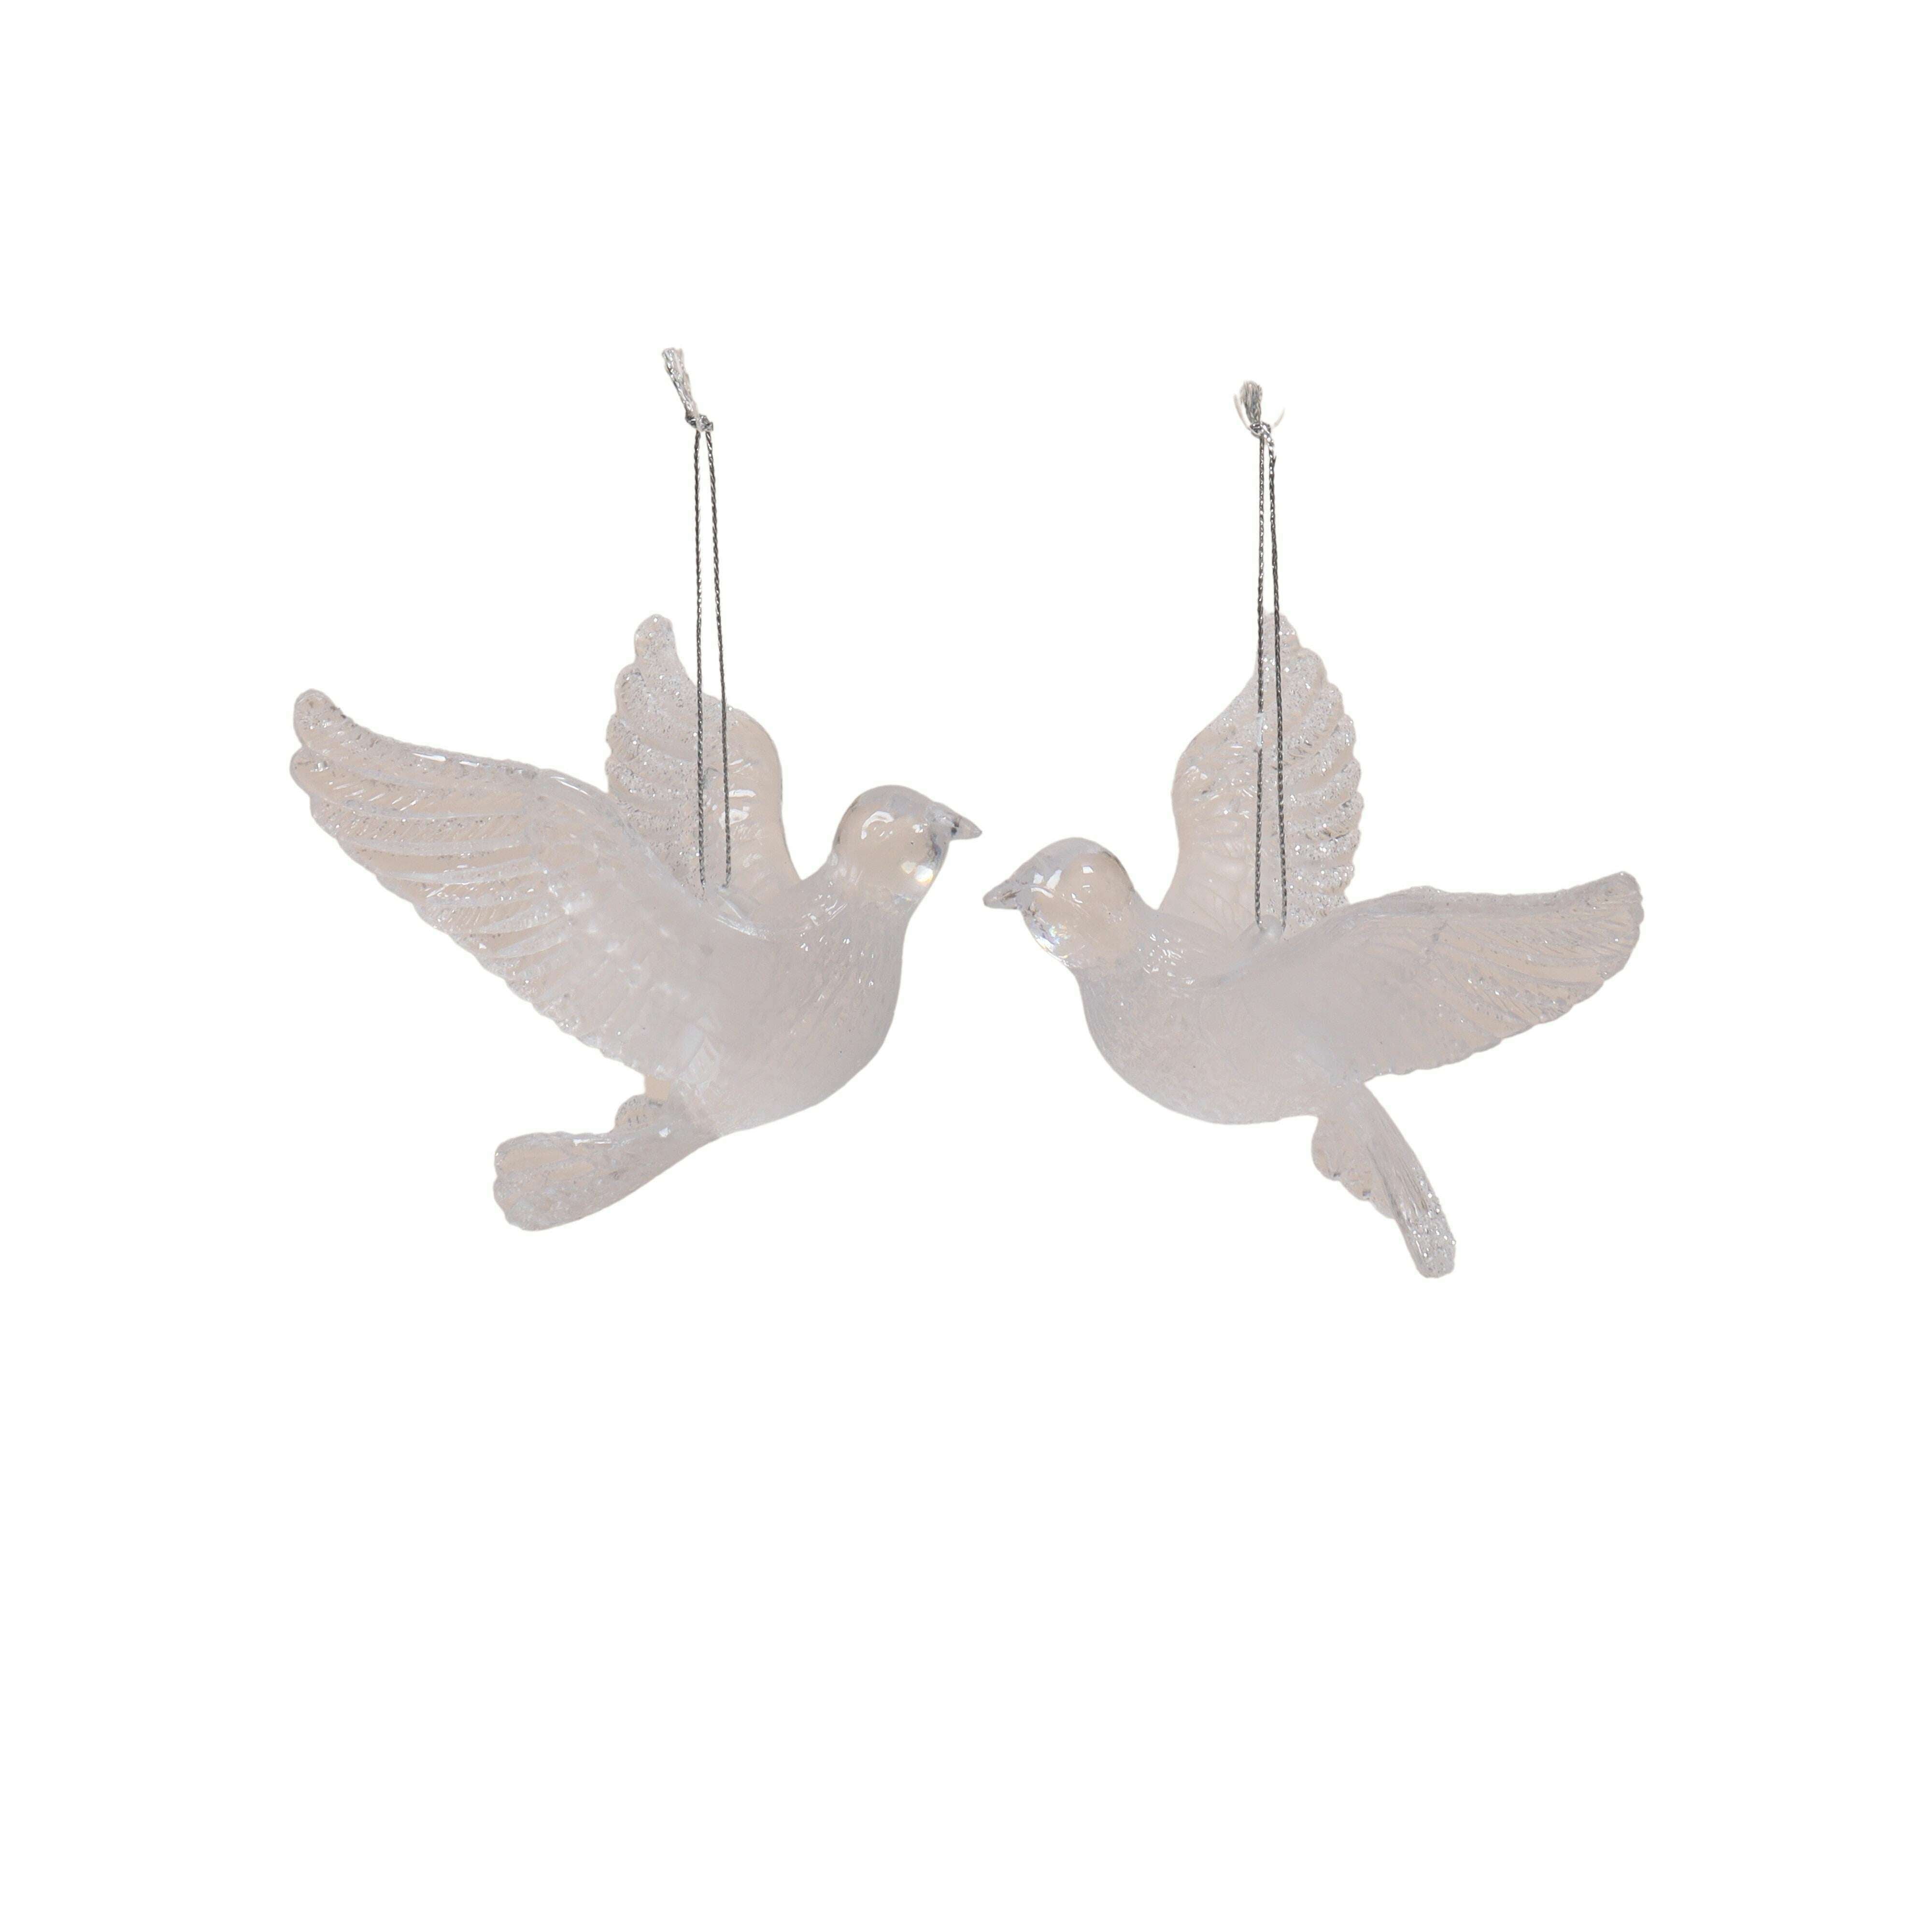 Impodimo Living & Giving:Hanging Dove Ornament:Swing Gifts:Clear